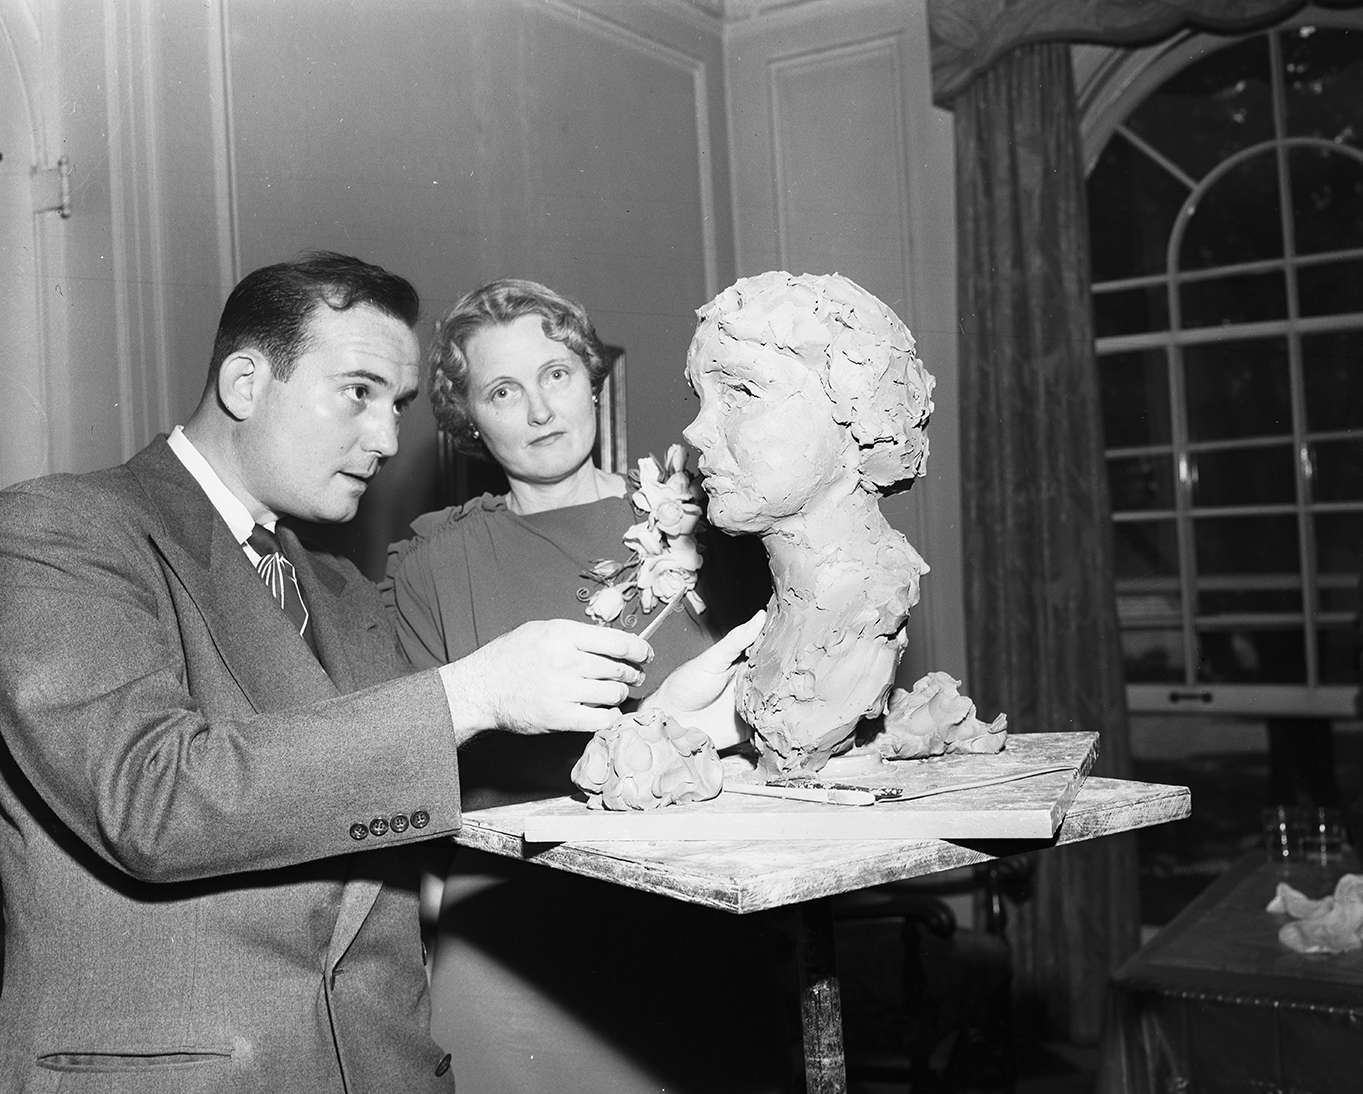 Black-and-white photo of a man sculpting a bust of the woman standing next to him.